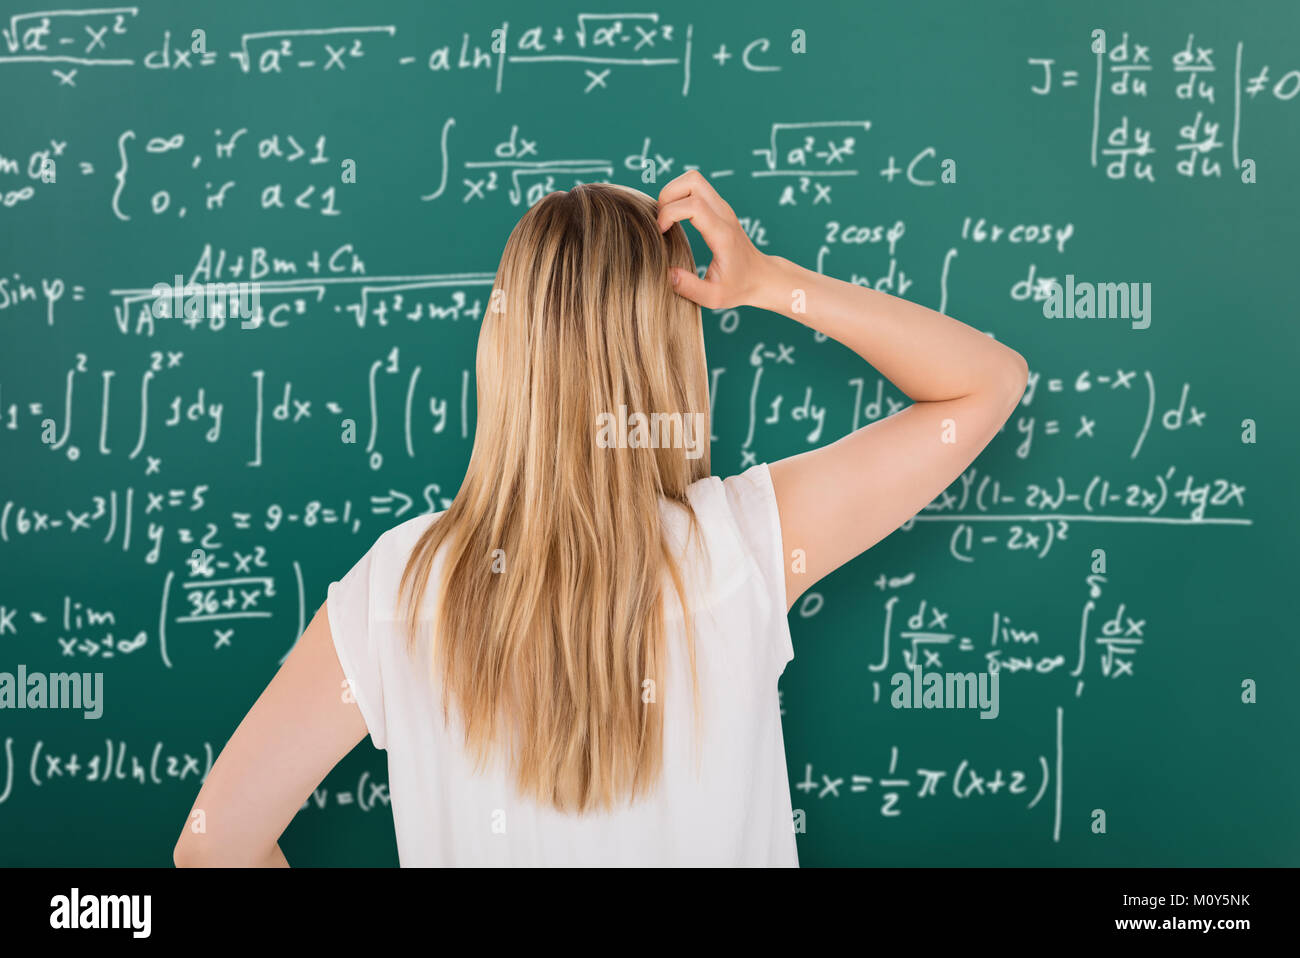 Rear View Of A Confused Girl Looking At Blackboard With Formulas In Classroom Stock Photo